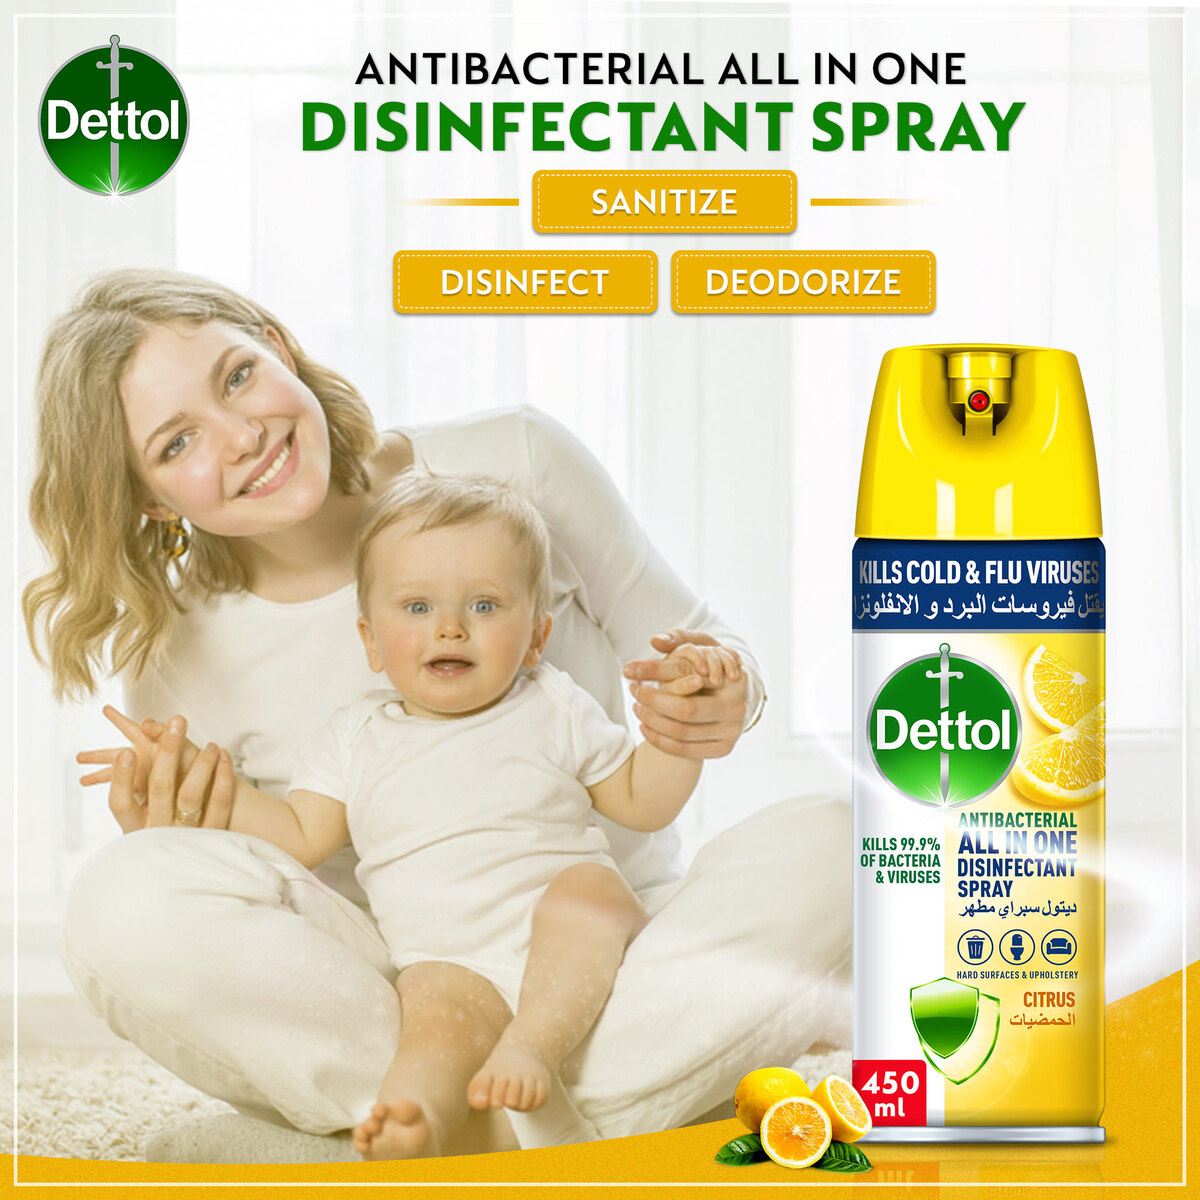 Dettol Citrus Anti-Bacterial All In One Disinfectant Spray 450ml + 170ml